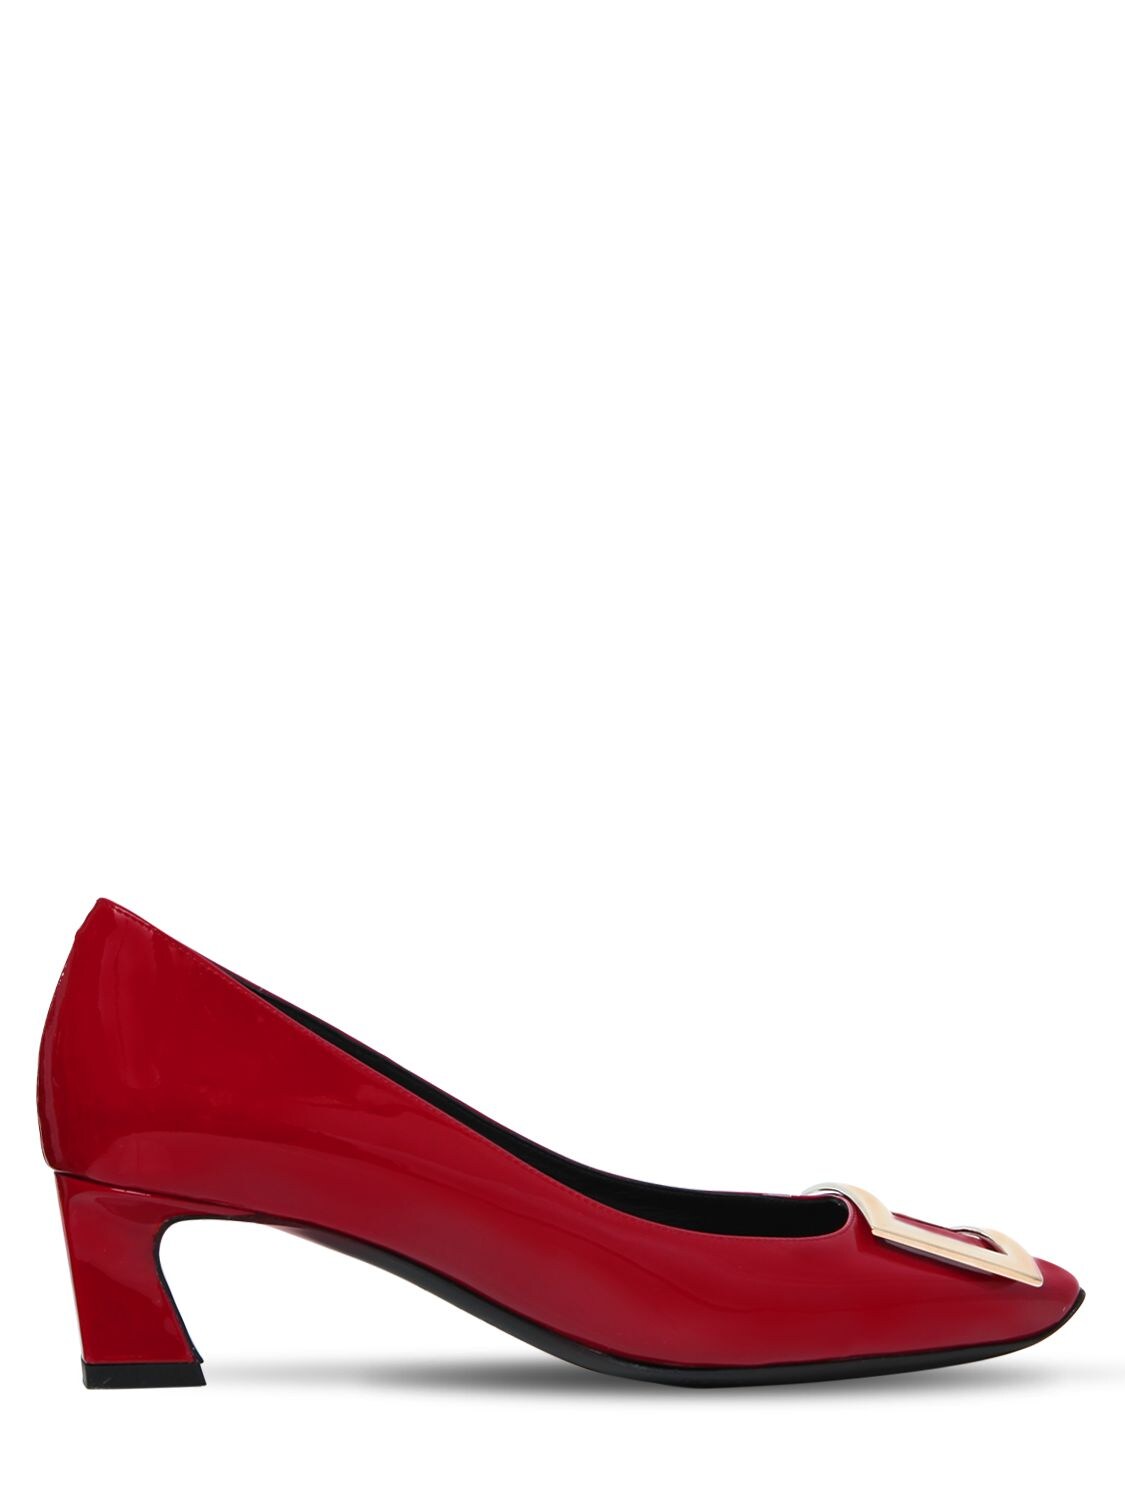 Roger Vivier 45mm Trompette Patent Leather Pumps In Red